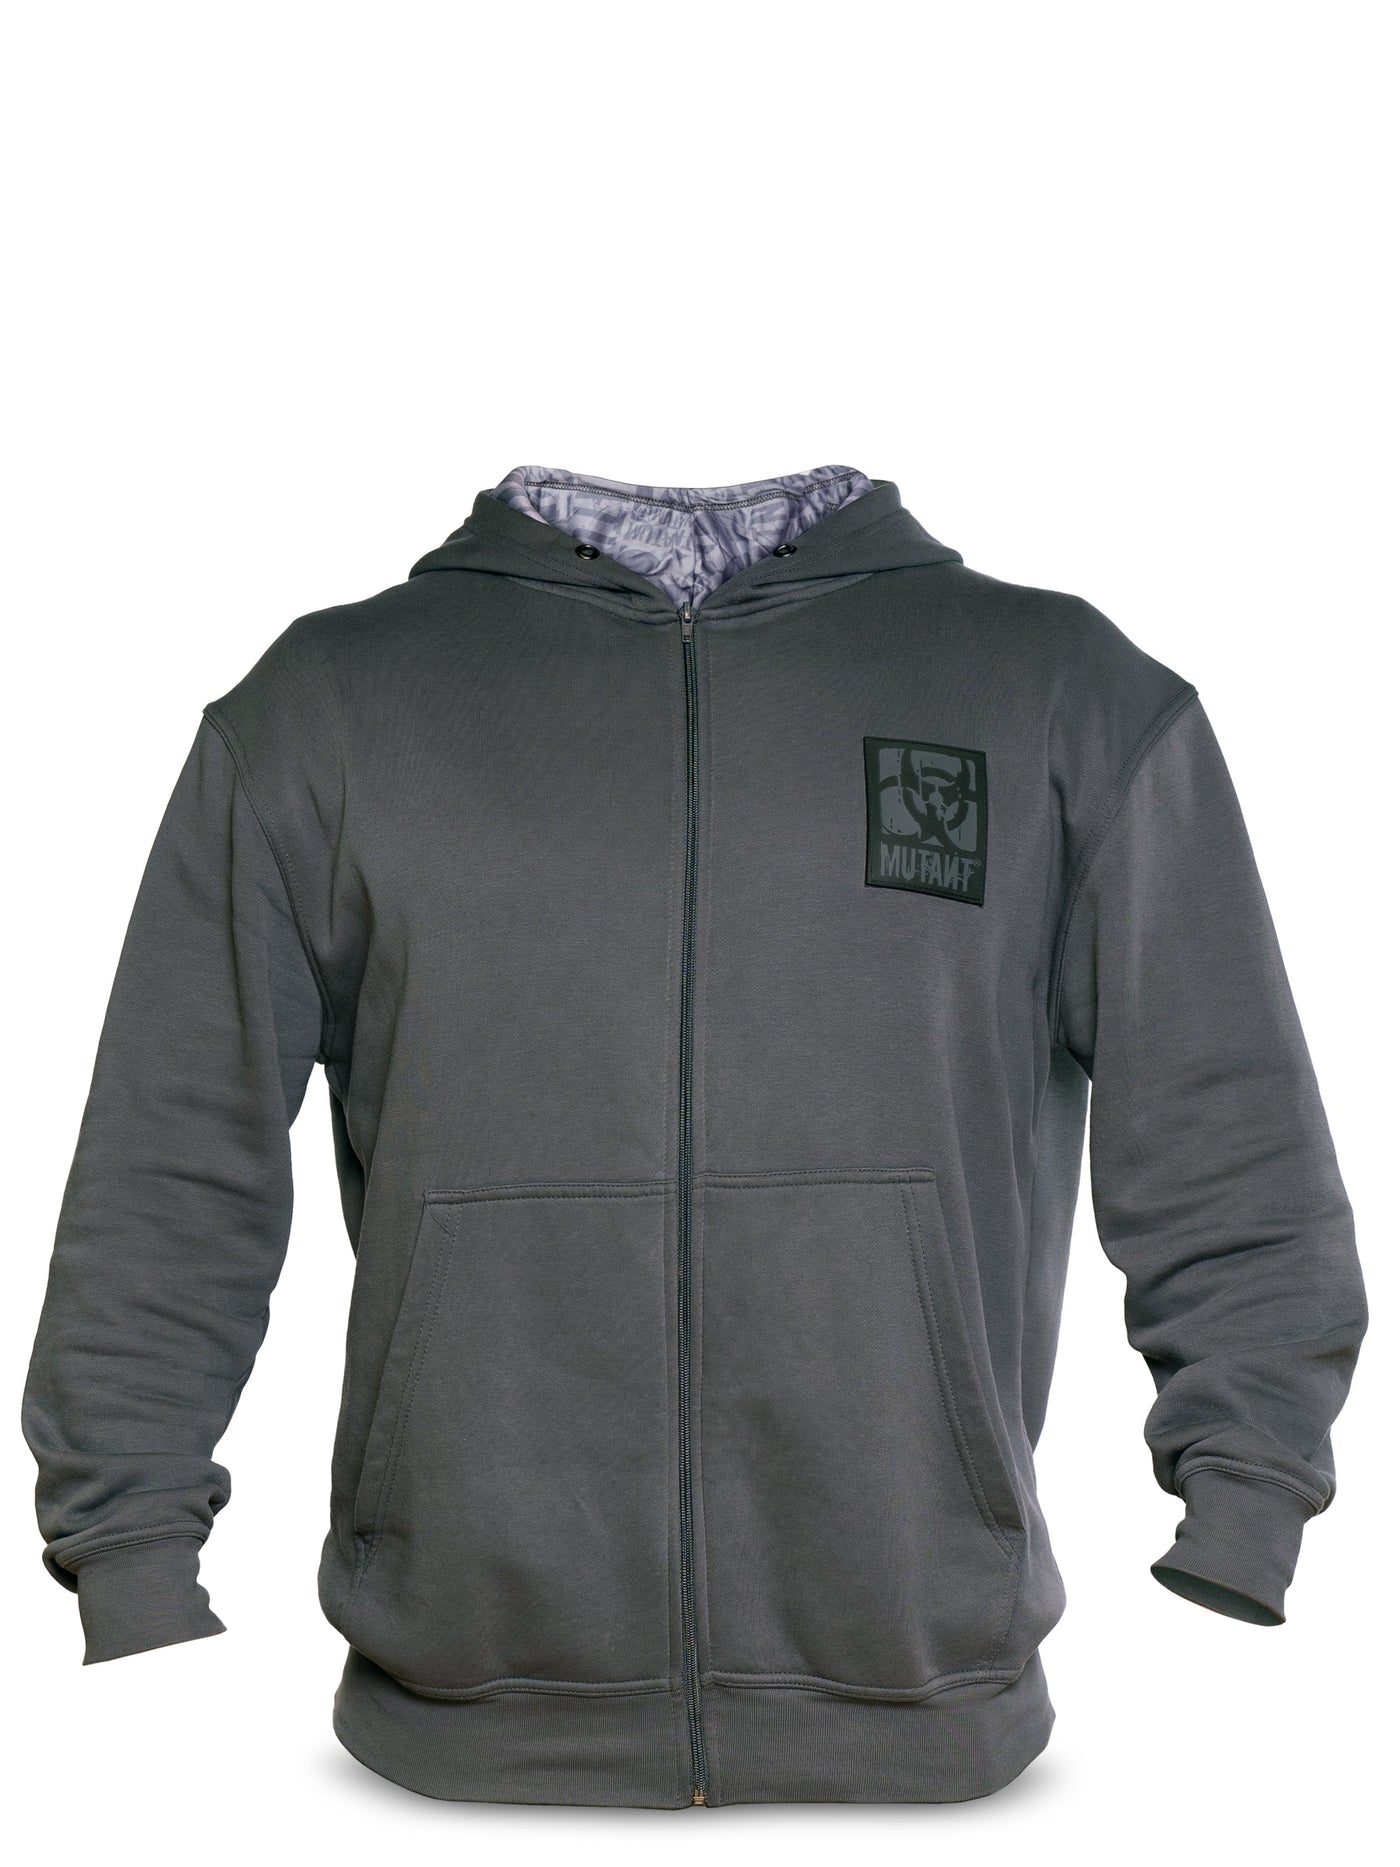 Front view of Grey Mutant Patched Zip-Up Gym Hoodie with black logo patch on left chest, two pockets, and light grey internal hood lining with watermarked Mutant logo. White background